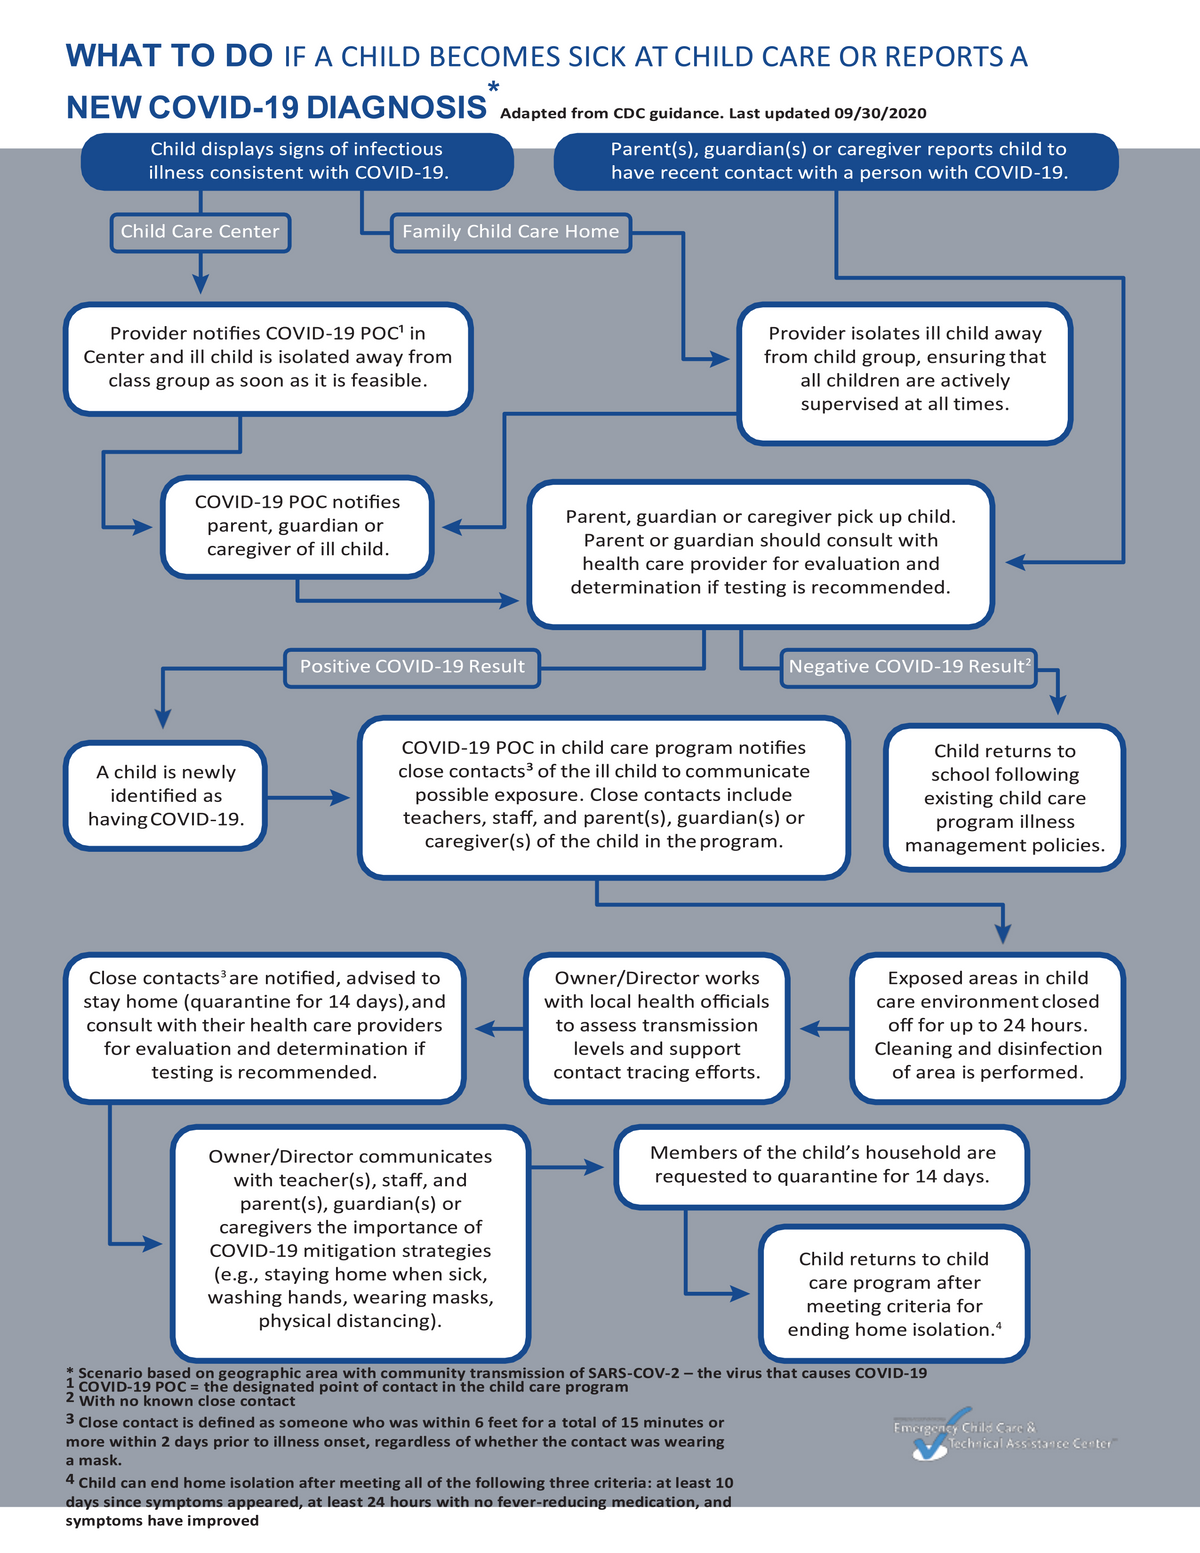 Flowchart: What to do if a child becomes sick or reports new Covid-19 diagnosis